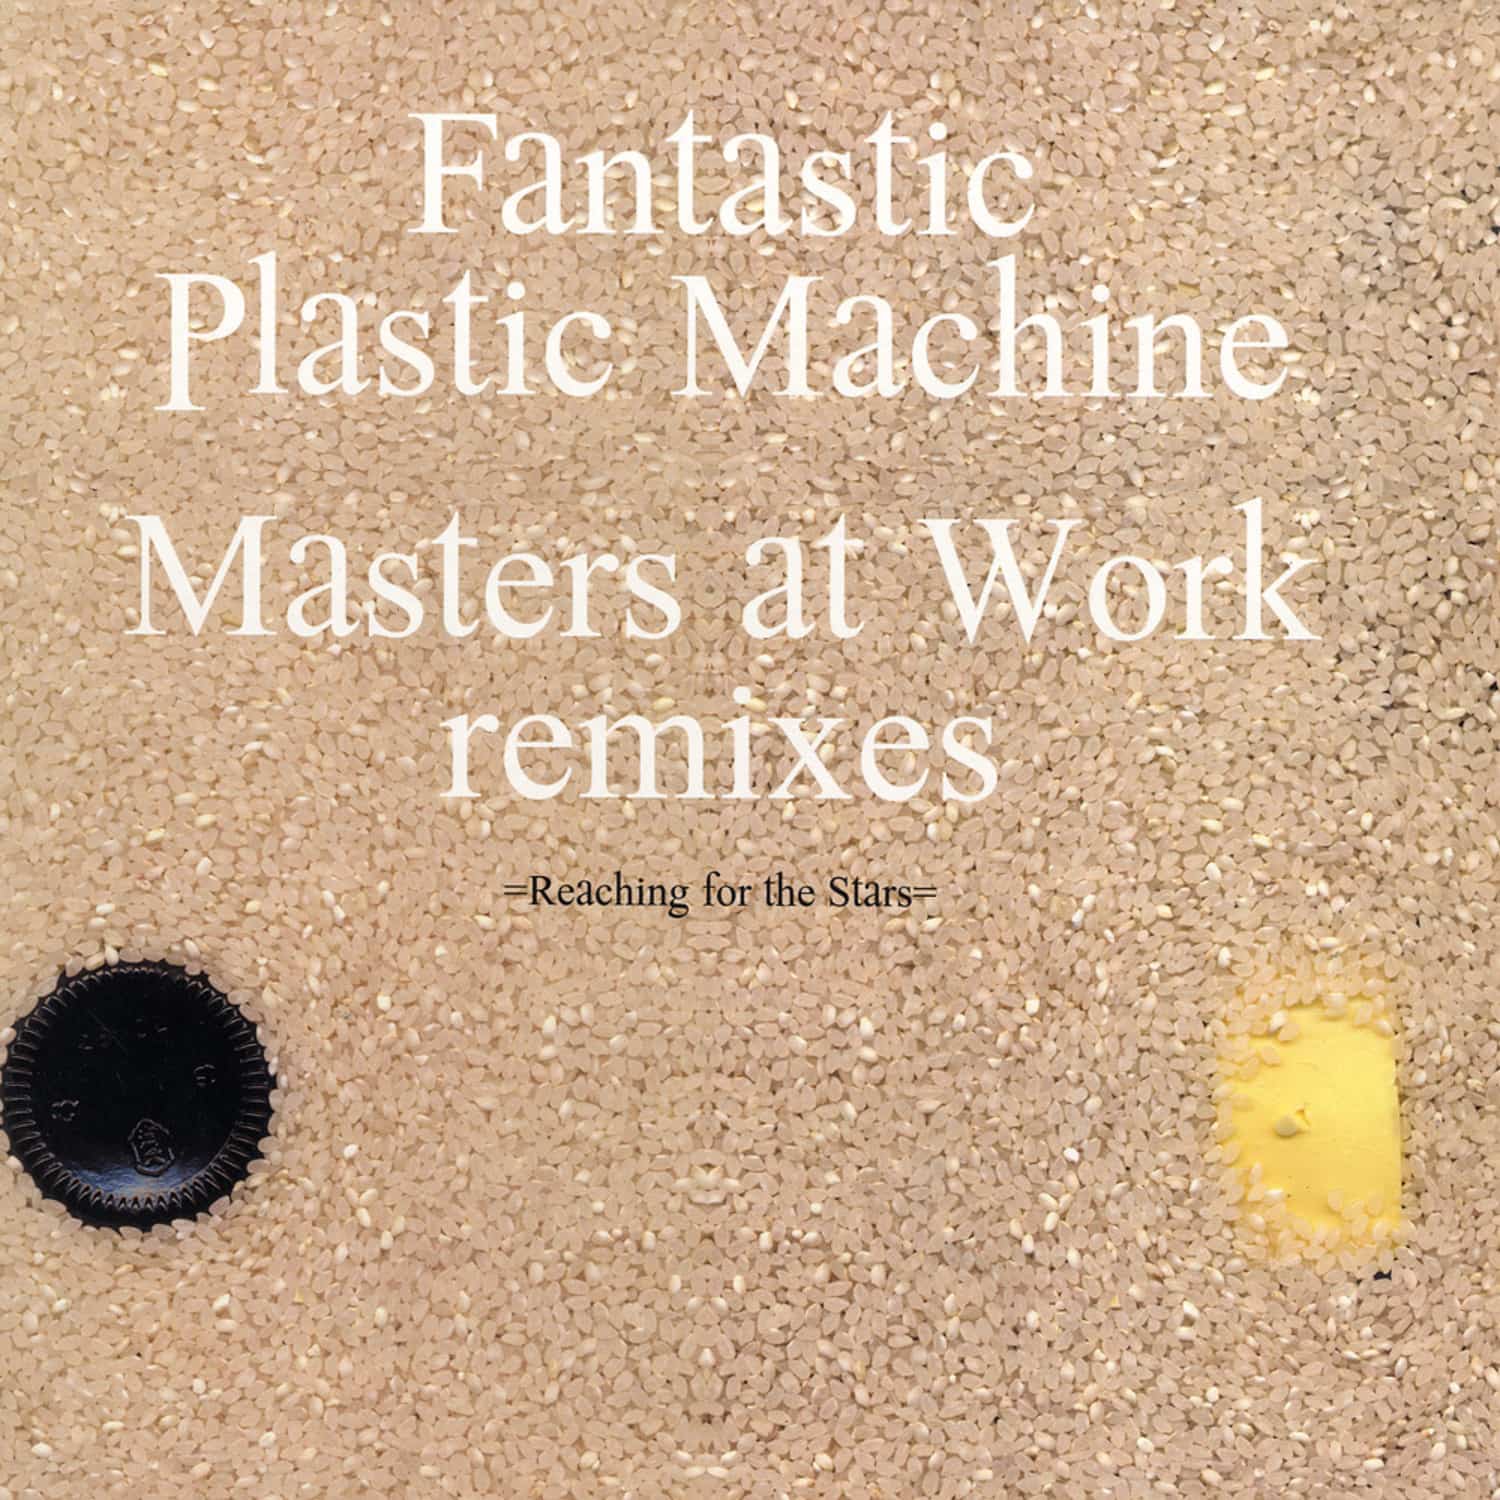 Fantastic Plastic Machine - REACHING FOR THE STARS - MASTERS AT WORK REMIXES